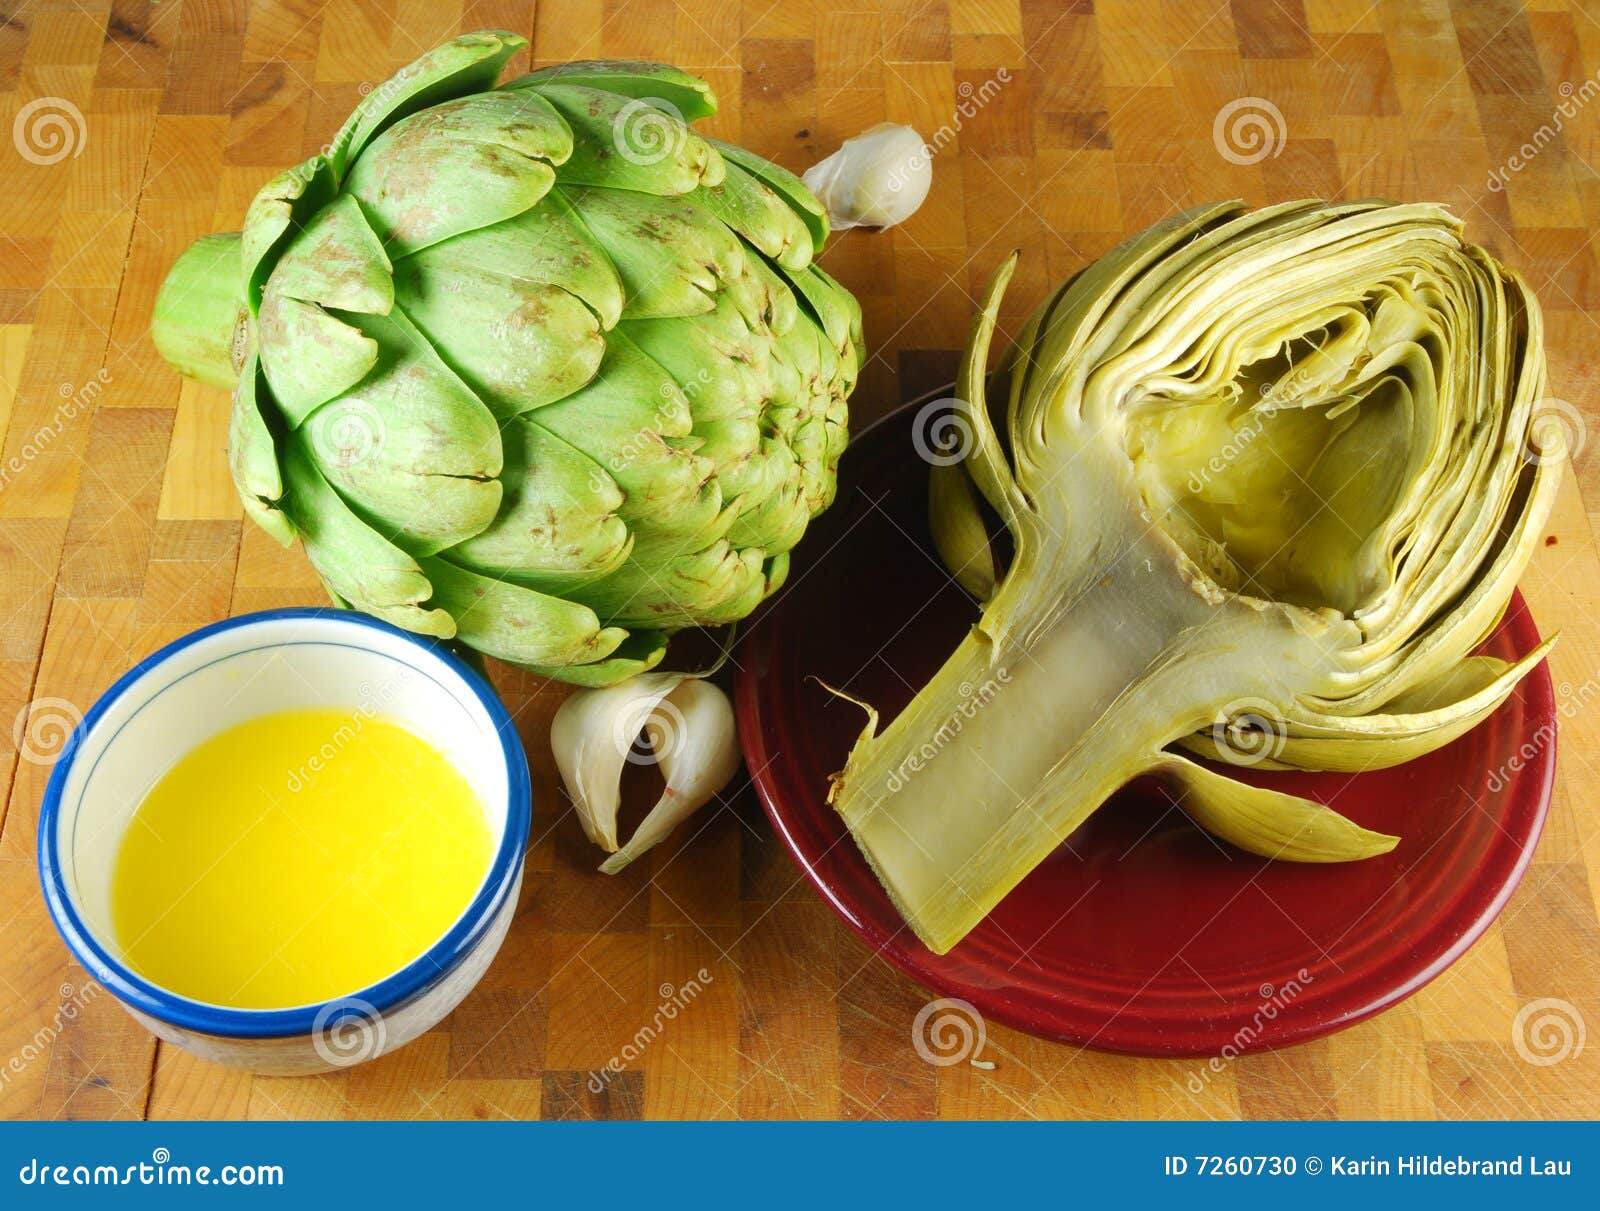 artichokes and butter